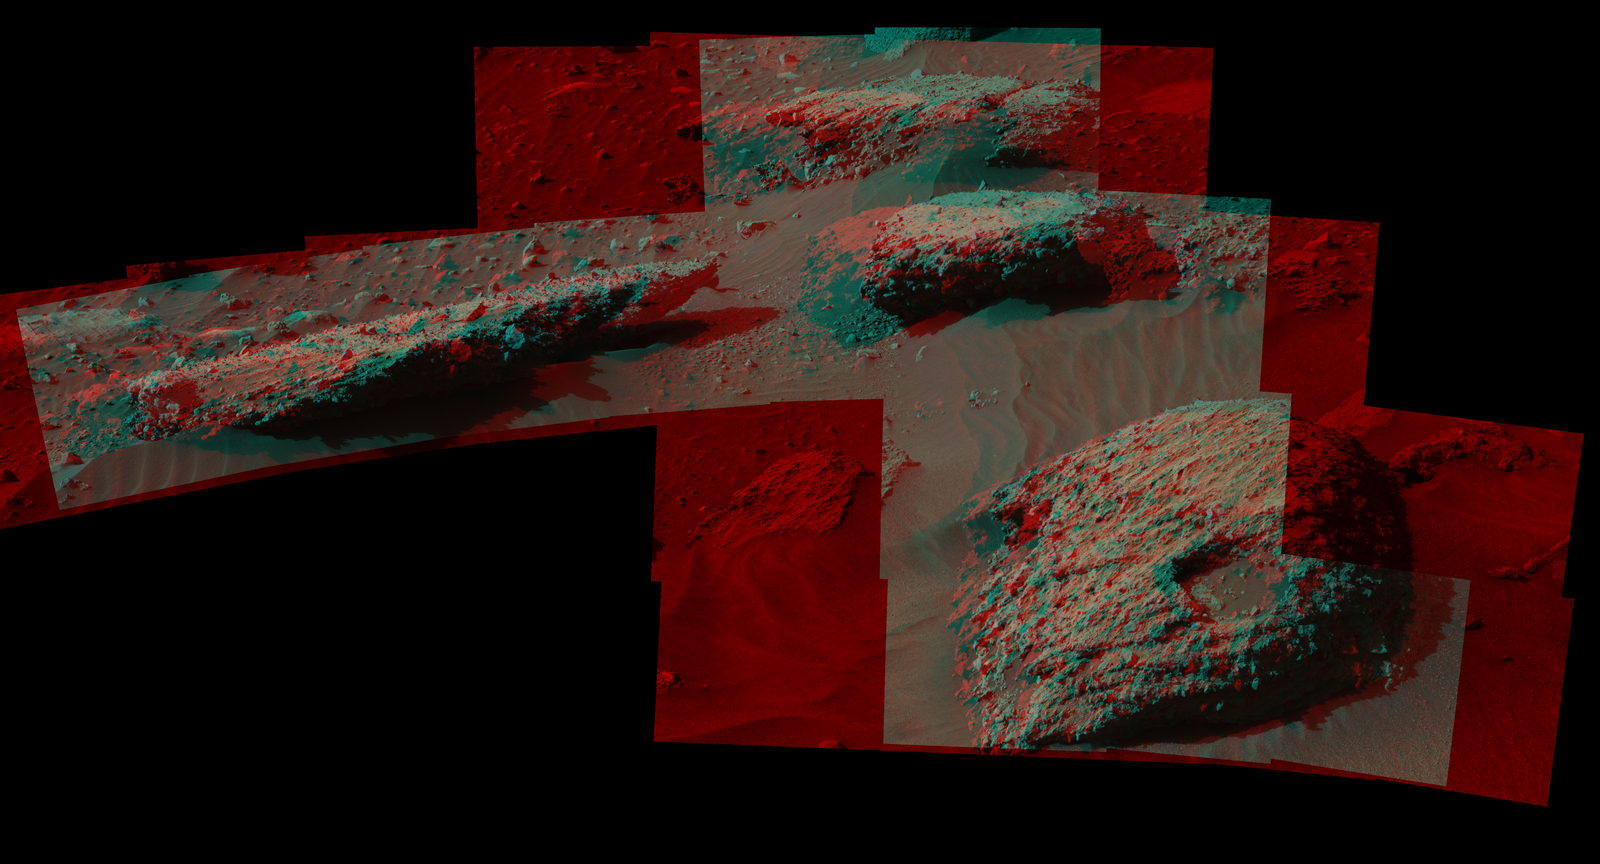 This July 22, 2016, stereo scene from the Mastcam on NASA's Curiosity Mars Rover shows boulders at a site called "Bimbe" on lower Mount Sharp. They contain pebble-size and larger rock fragments. The image appears three dimensional when viewed through red-blue glasses with the red lens on the left.